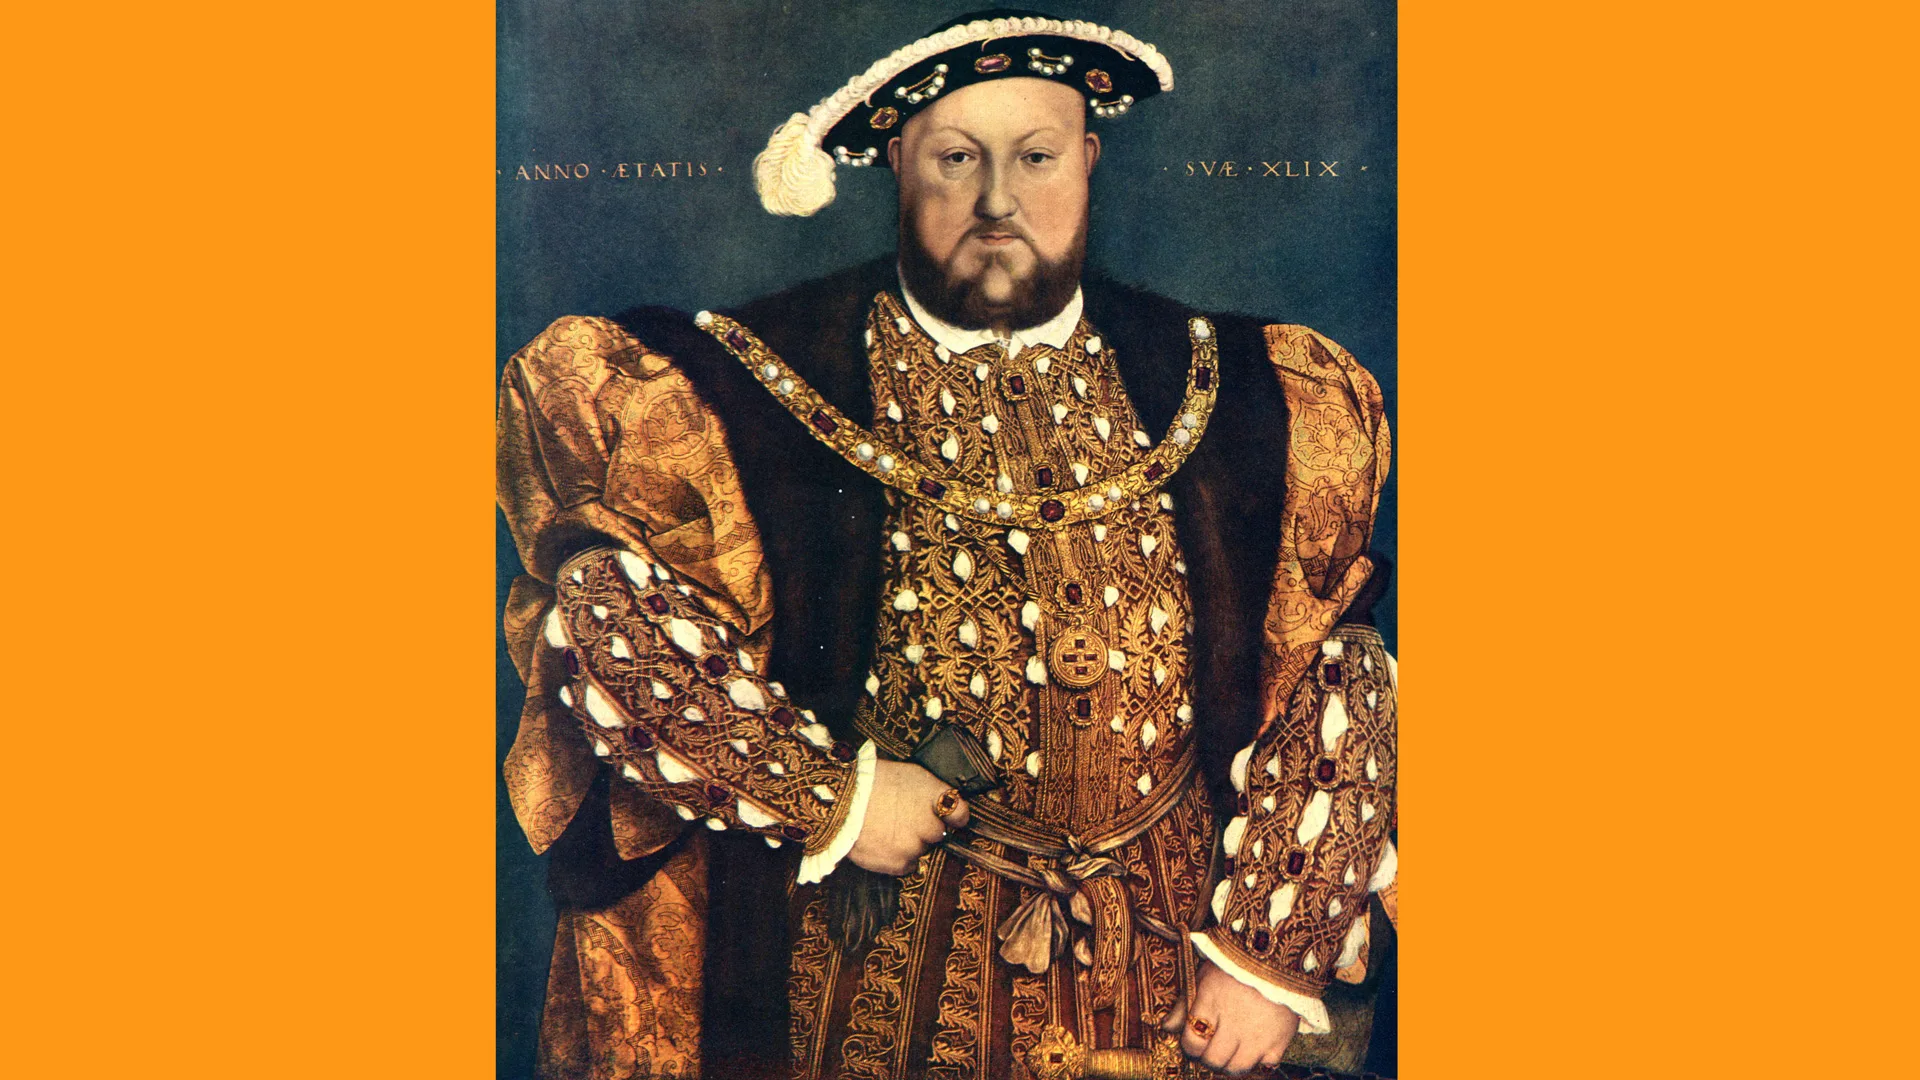 A painting of Henry VIII in his fur and velvet brown outfit with a feathered hat